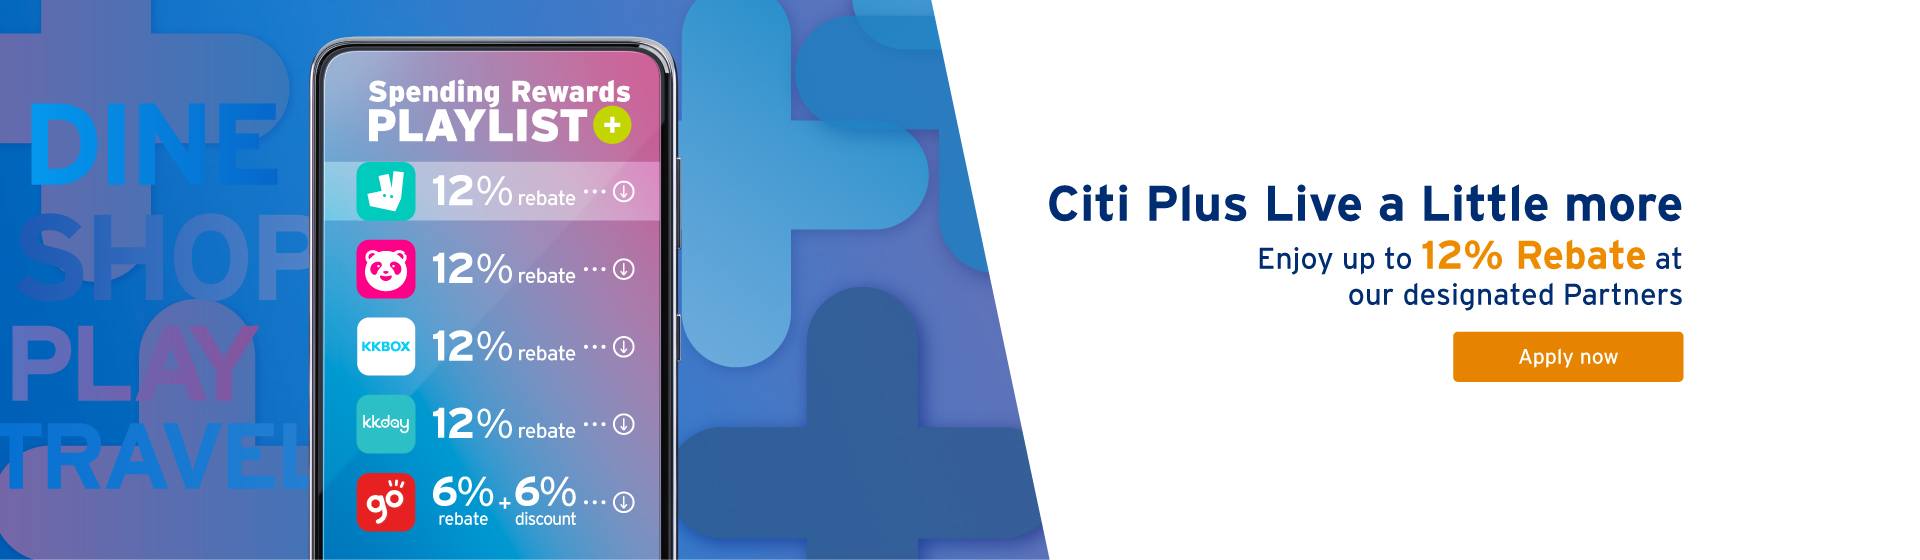 Citi Plus Live a Little More Enjoy up to 12% rebate at our designated partners